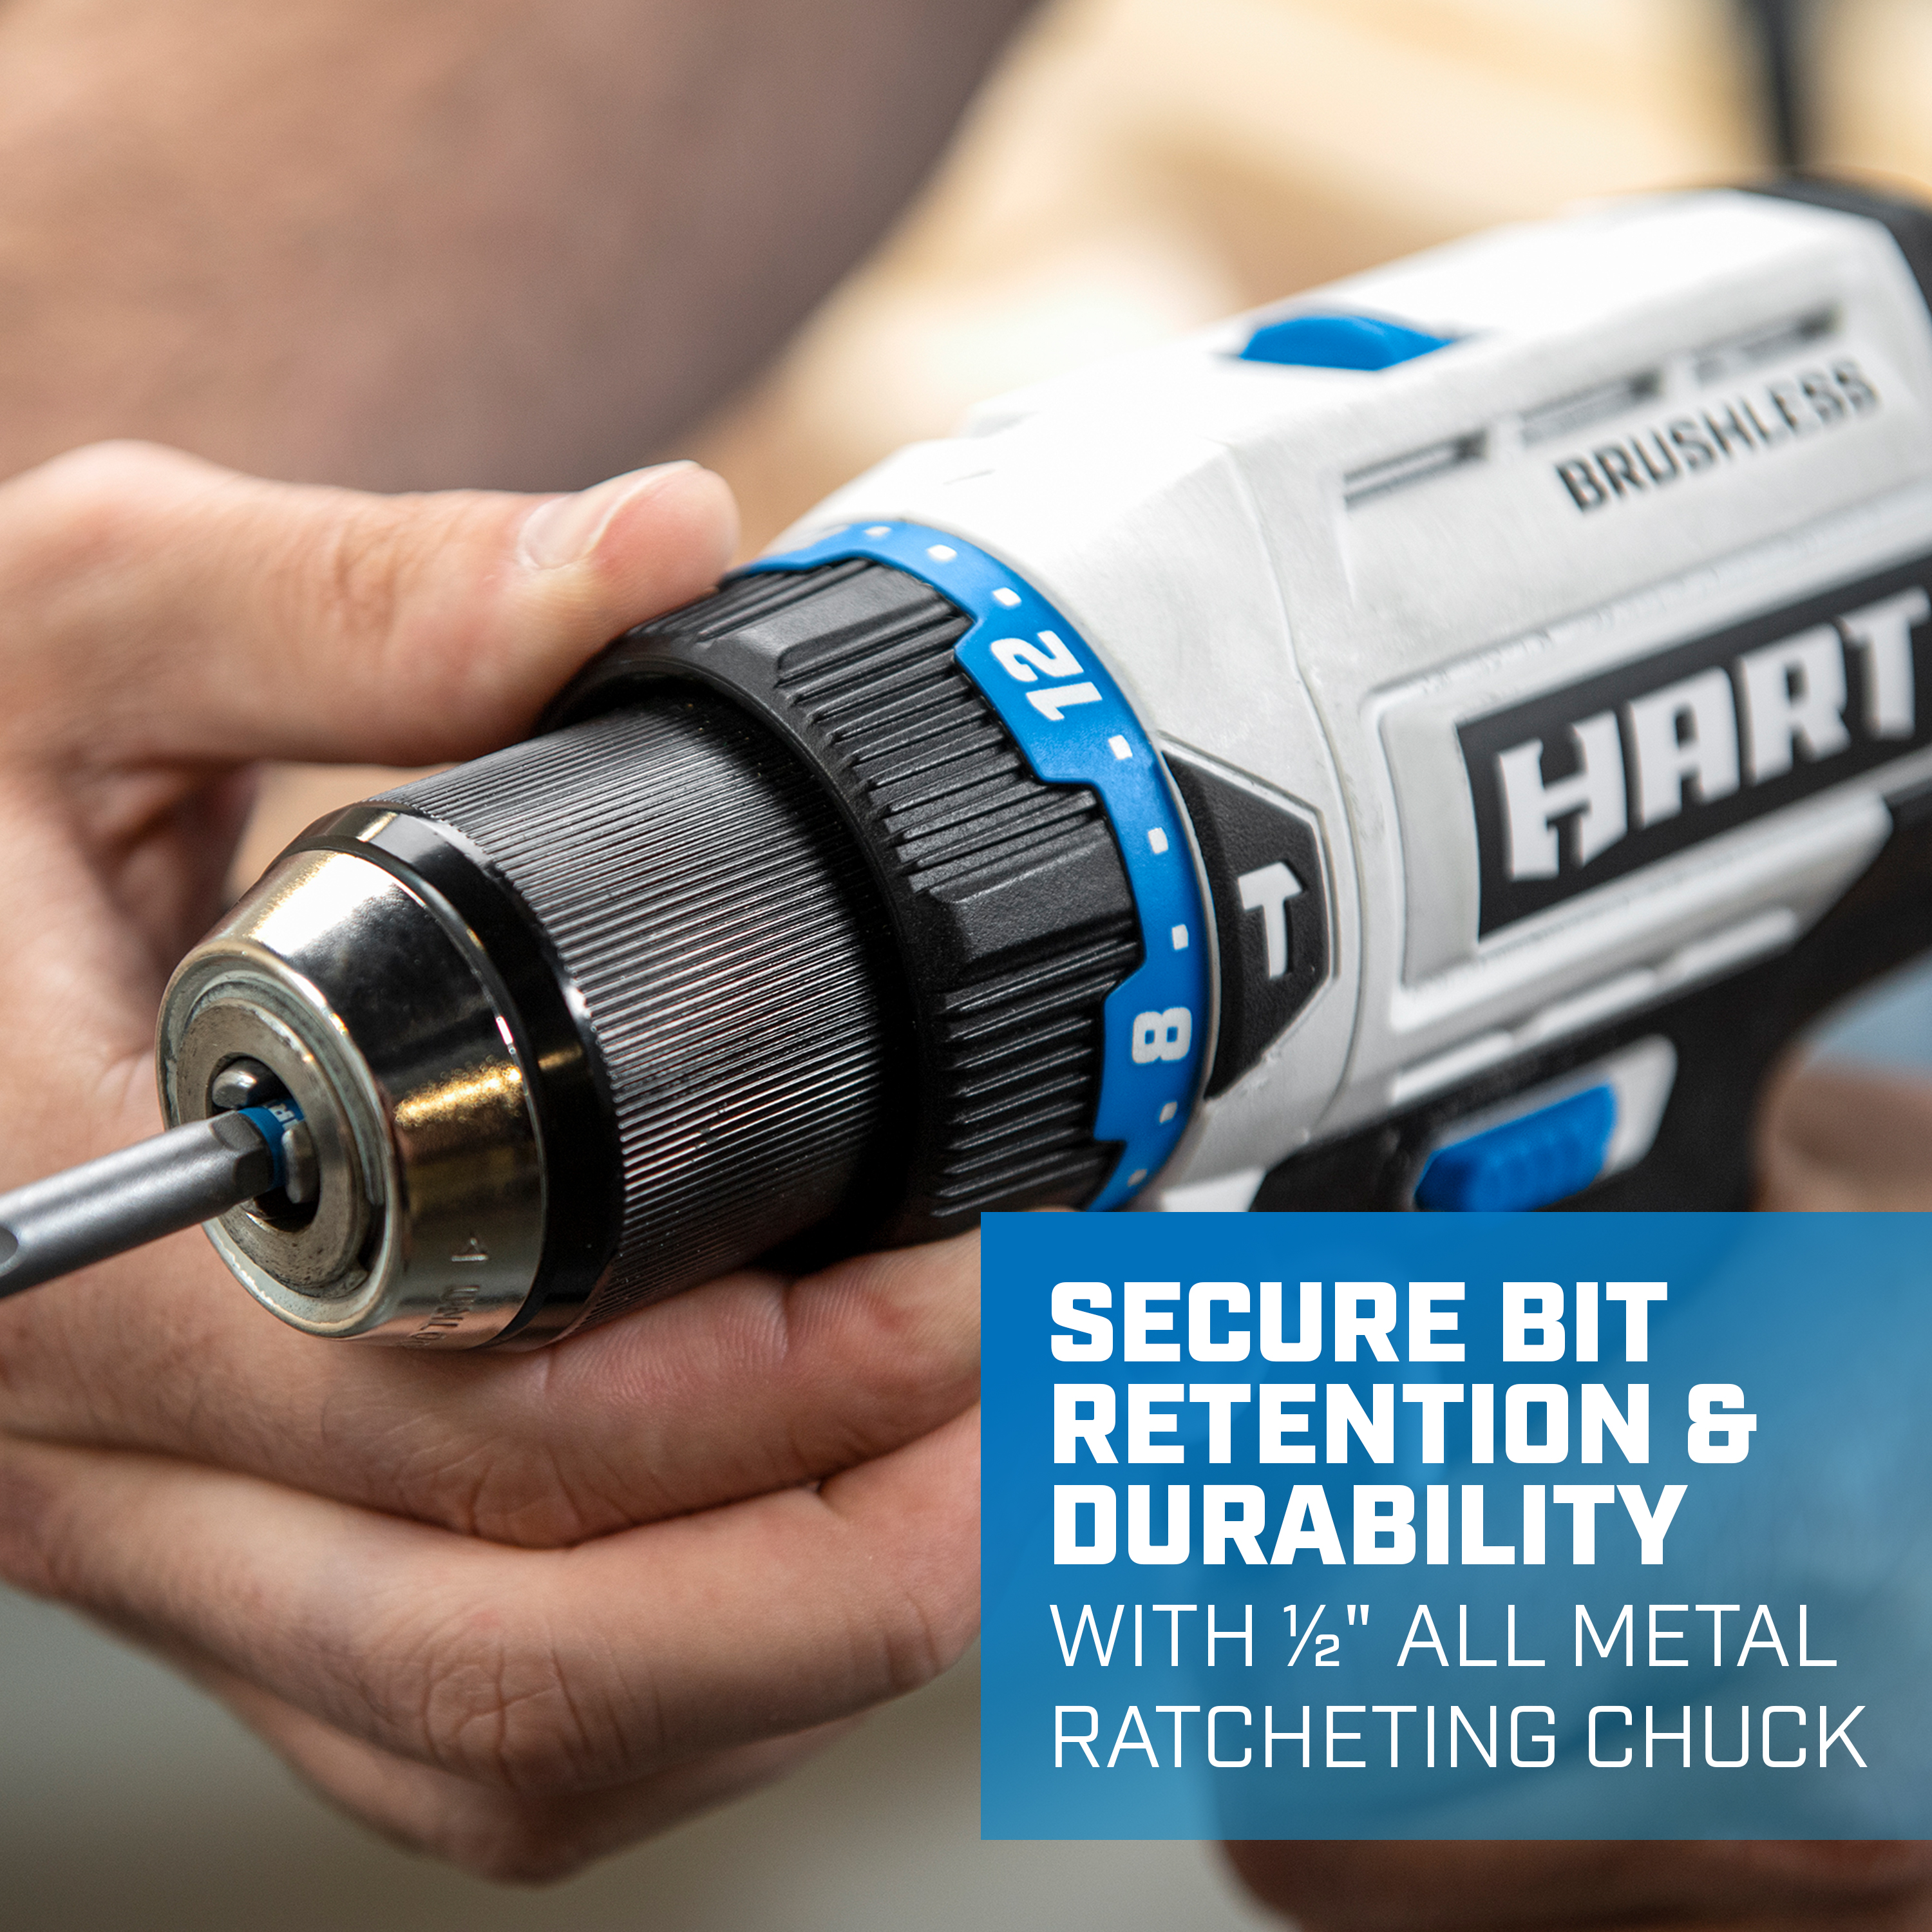 Secure bit retention & durability with 1/2" all metal ratcheting chuck